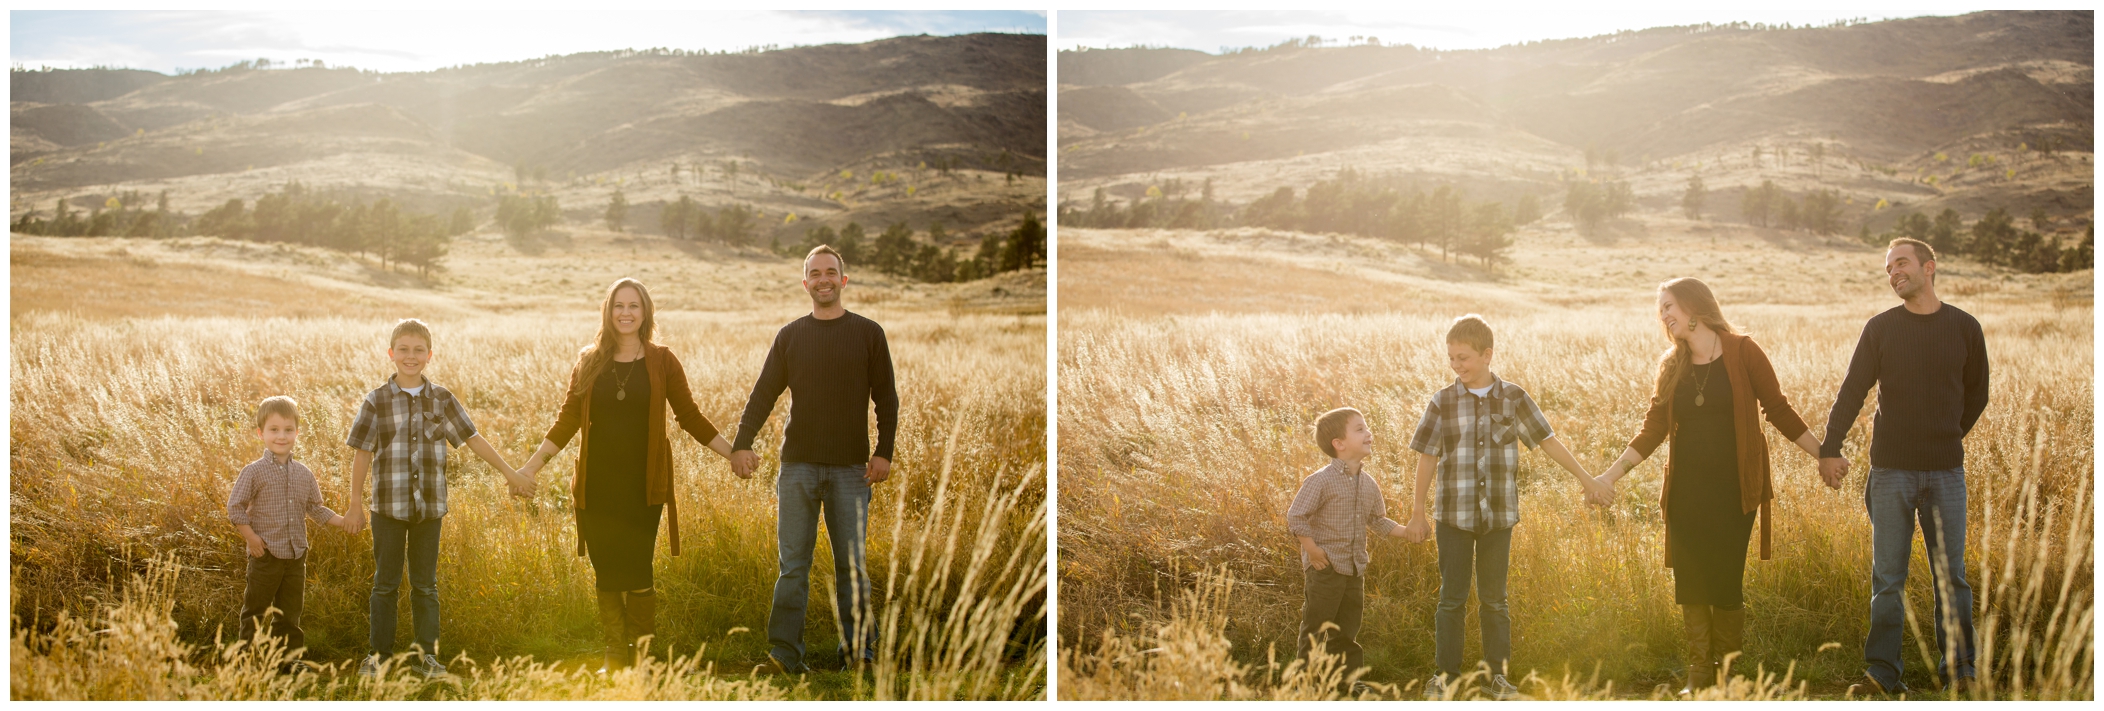 Family photos in Ft. Collins, CO